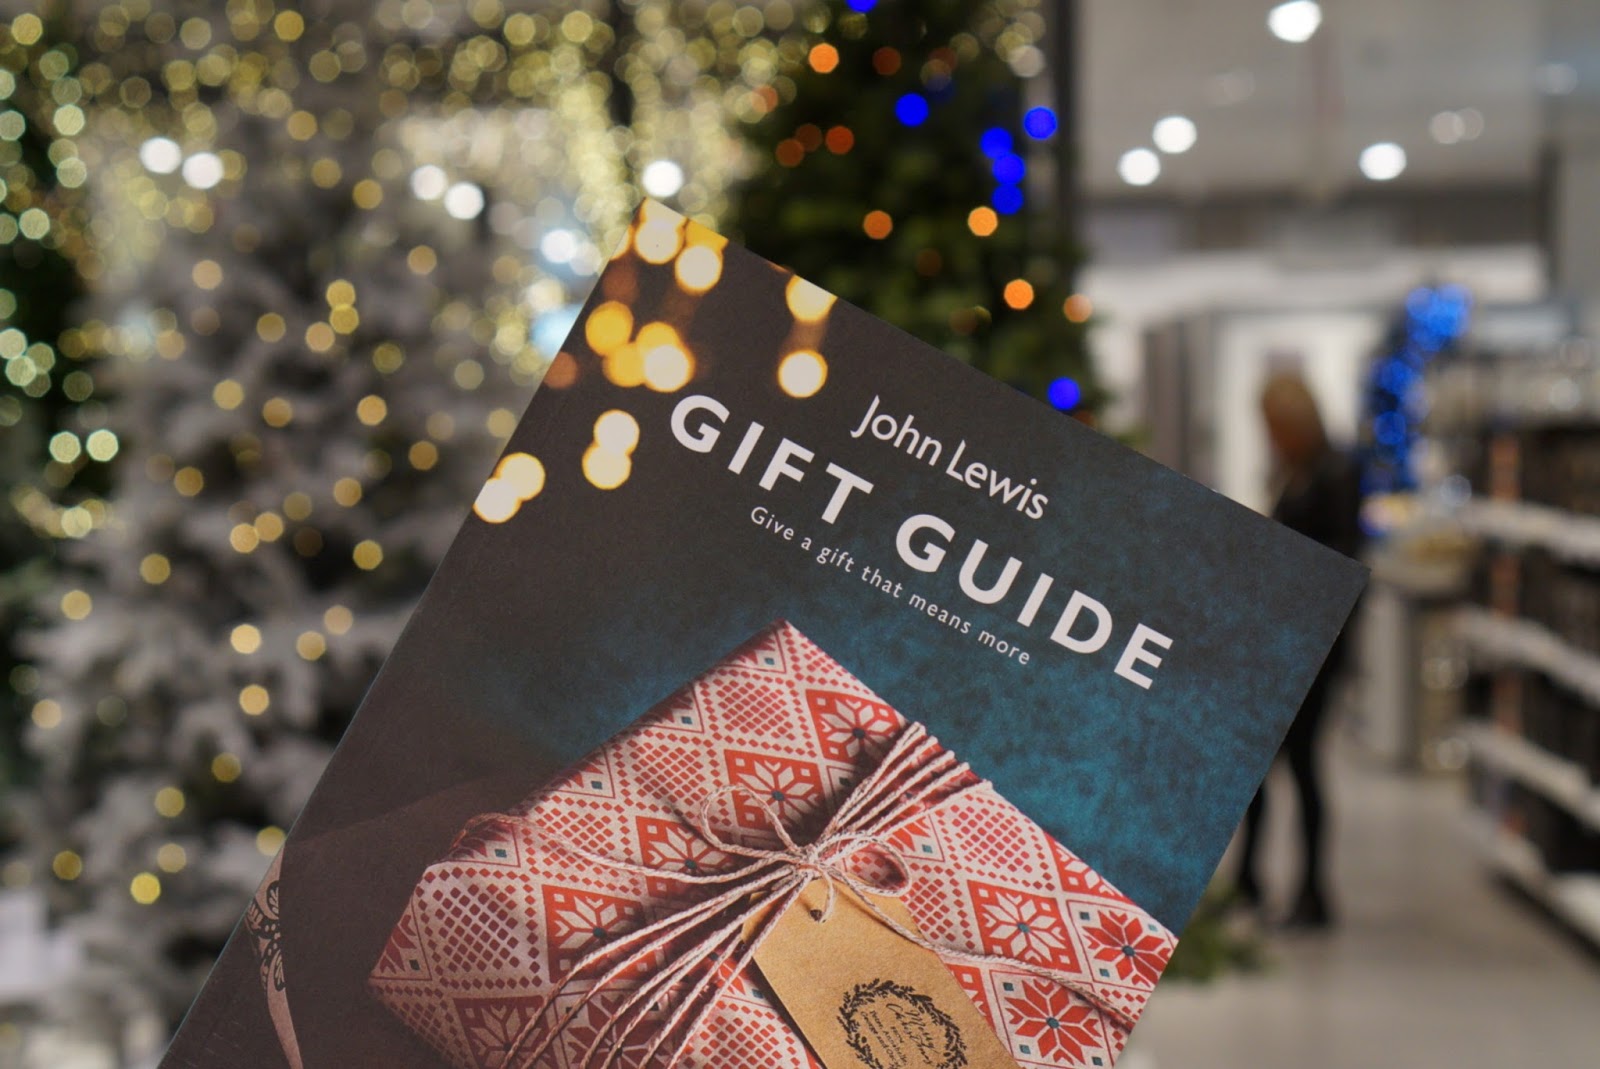 Beauty on Review: Top 10 Must-Have Items On Your John Lewis Christmas Wishlist